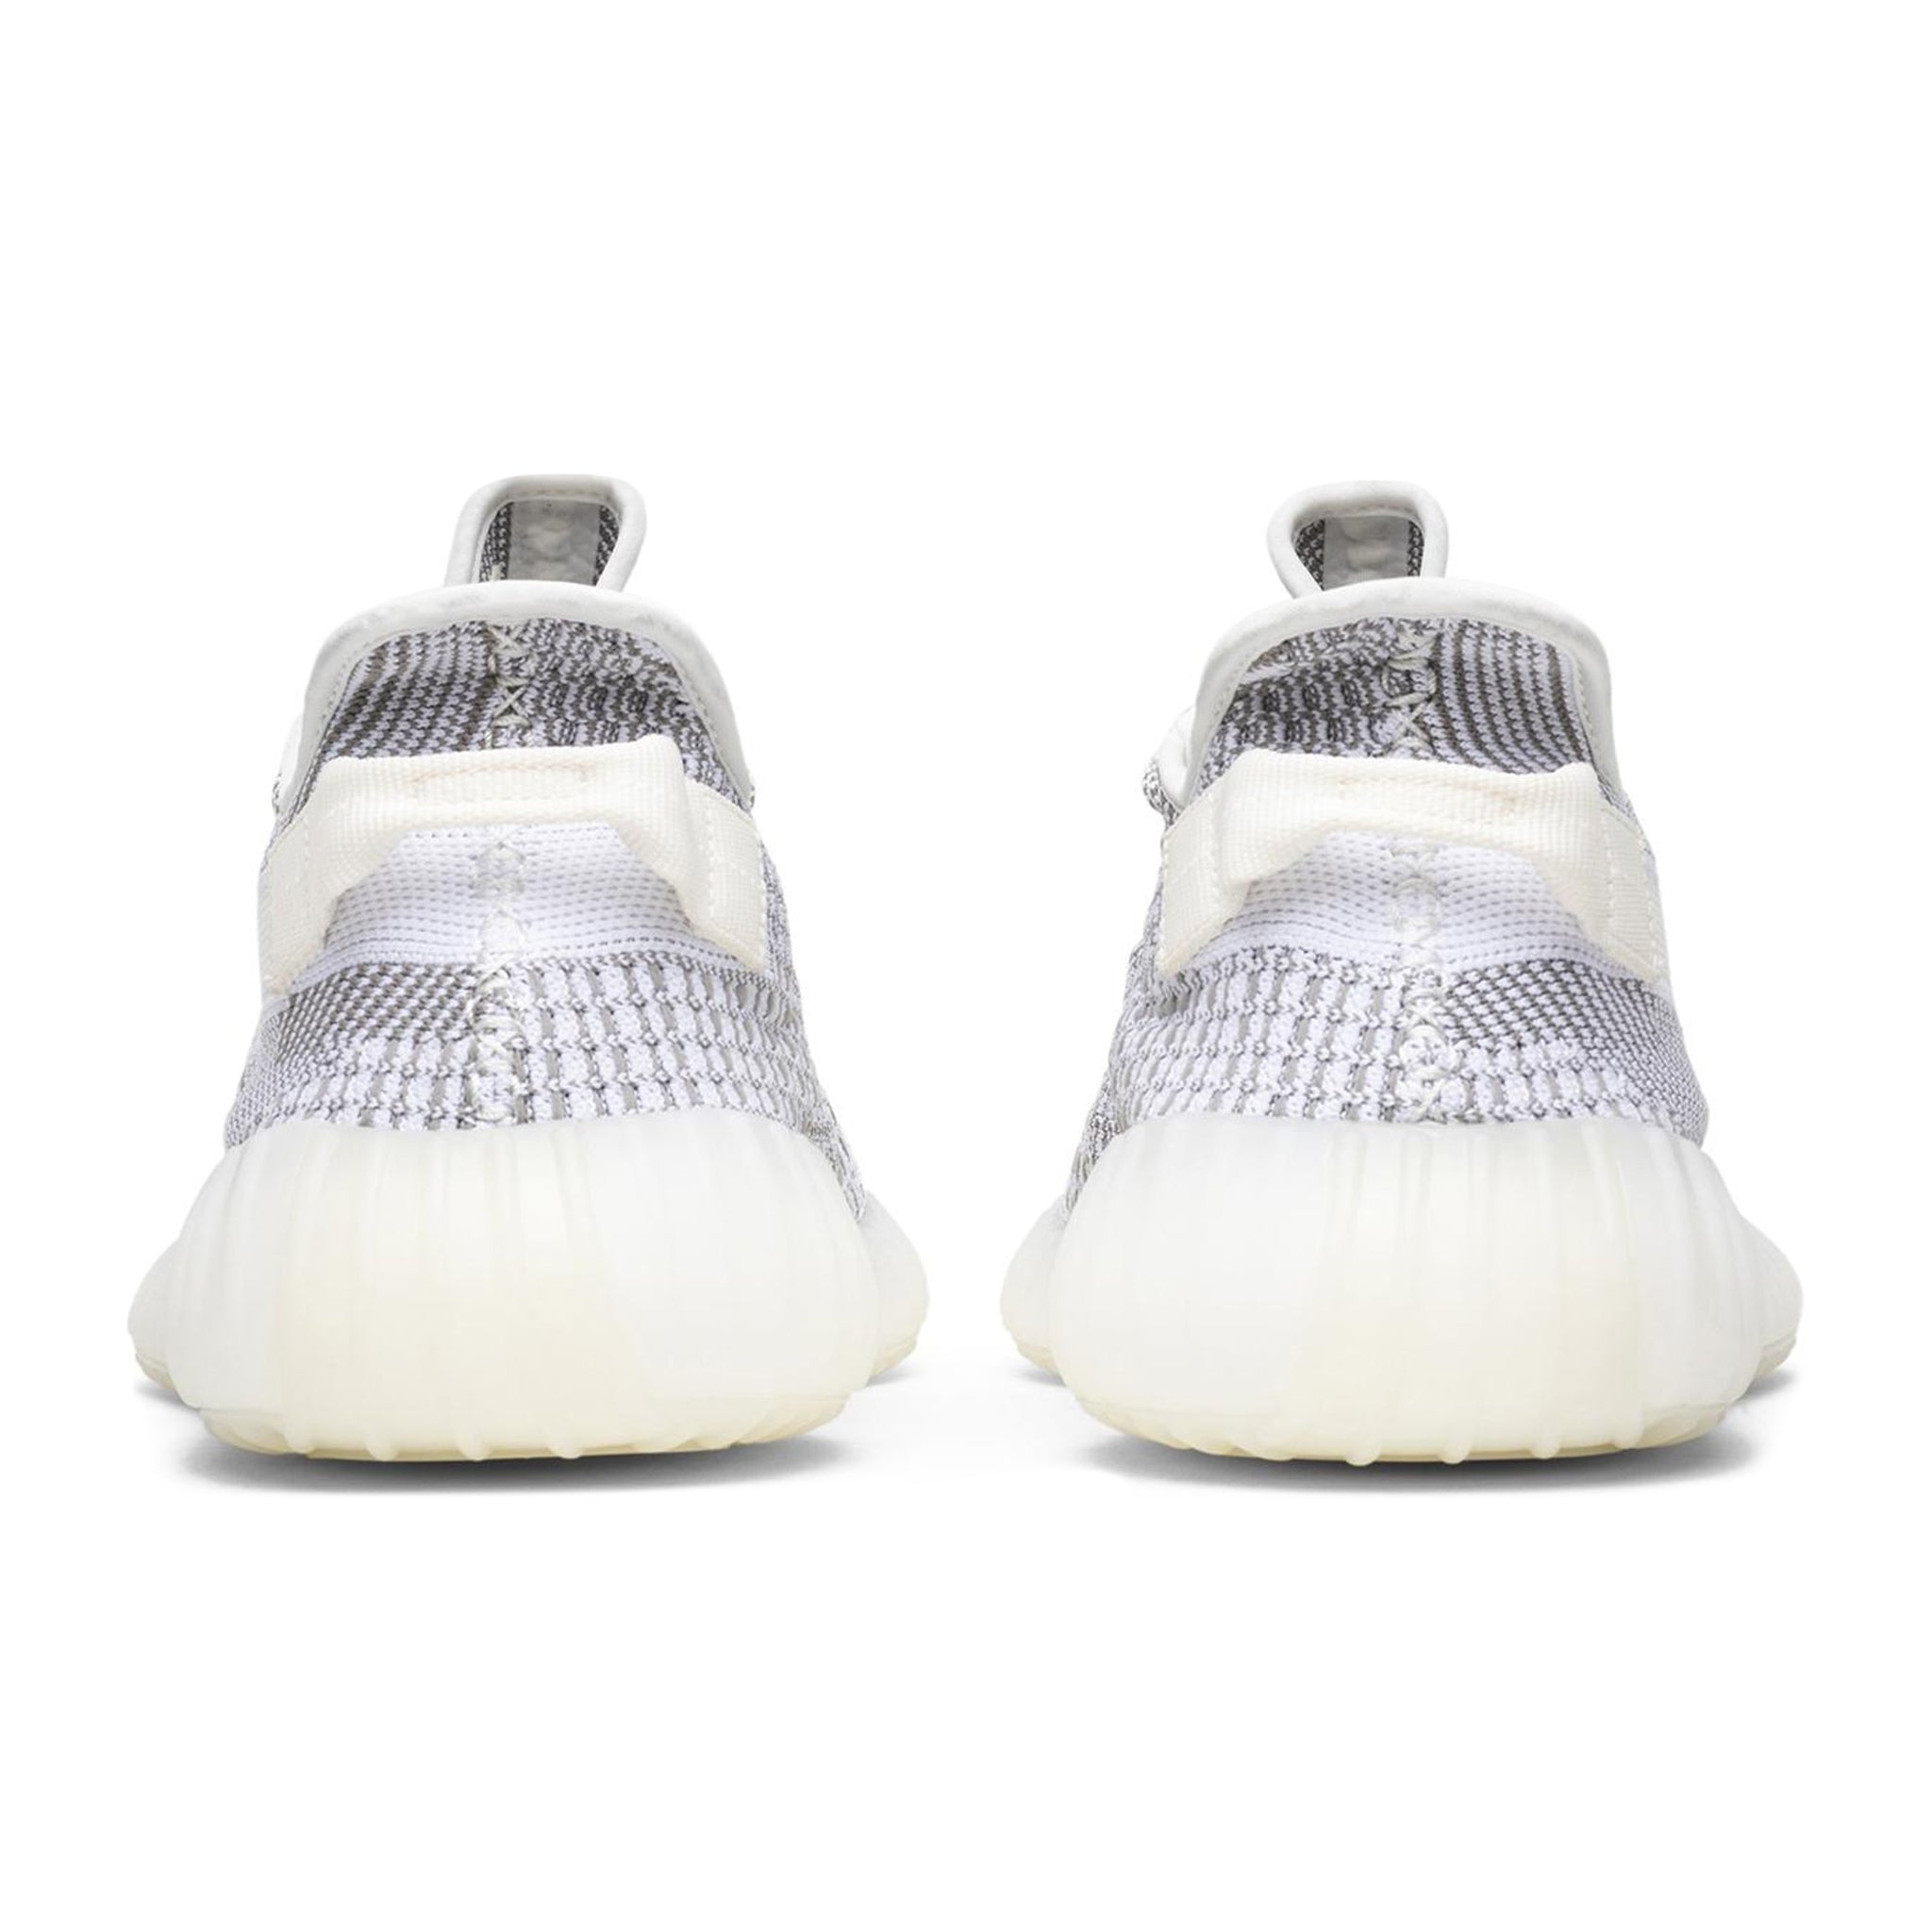 Back view of Adidas Yeezy Boost 350 V2 Static (Non-Reflective) (2018/2023) EF2905